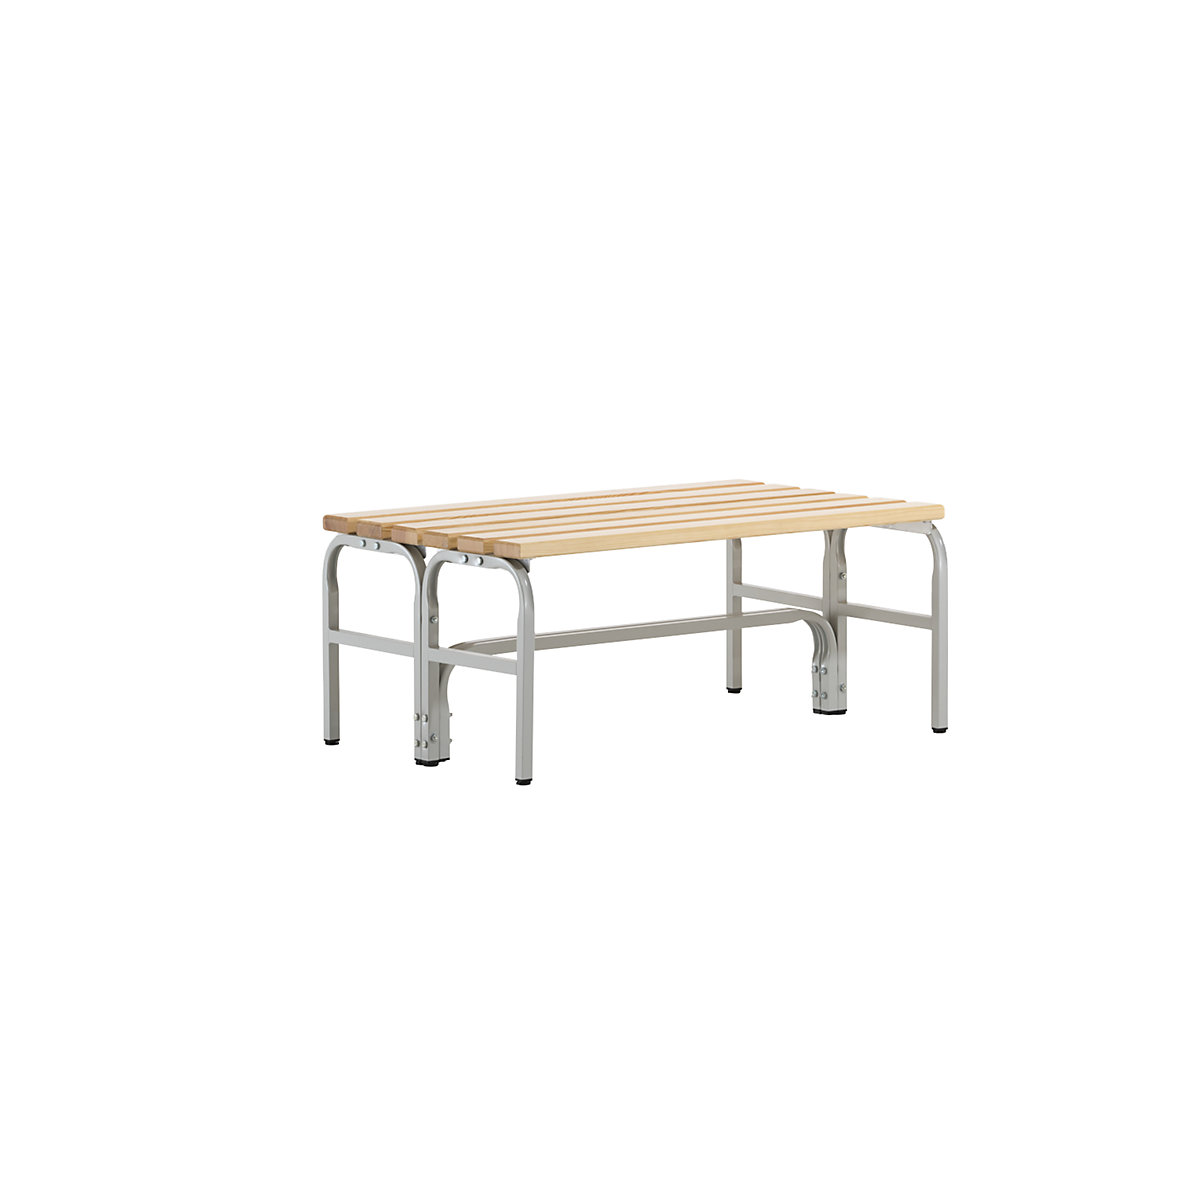 Cloakroom bench, double sided - Sypro